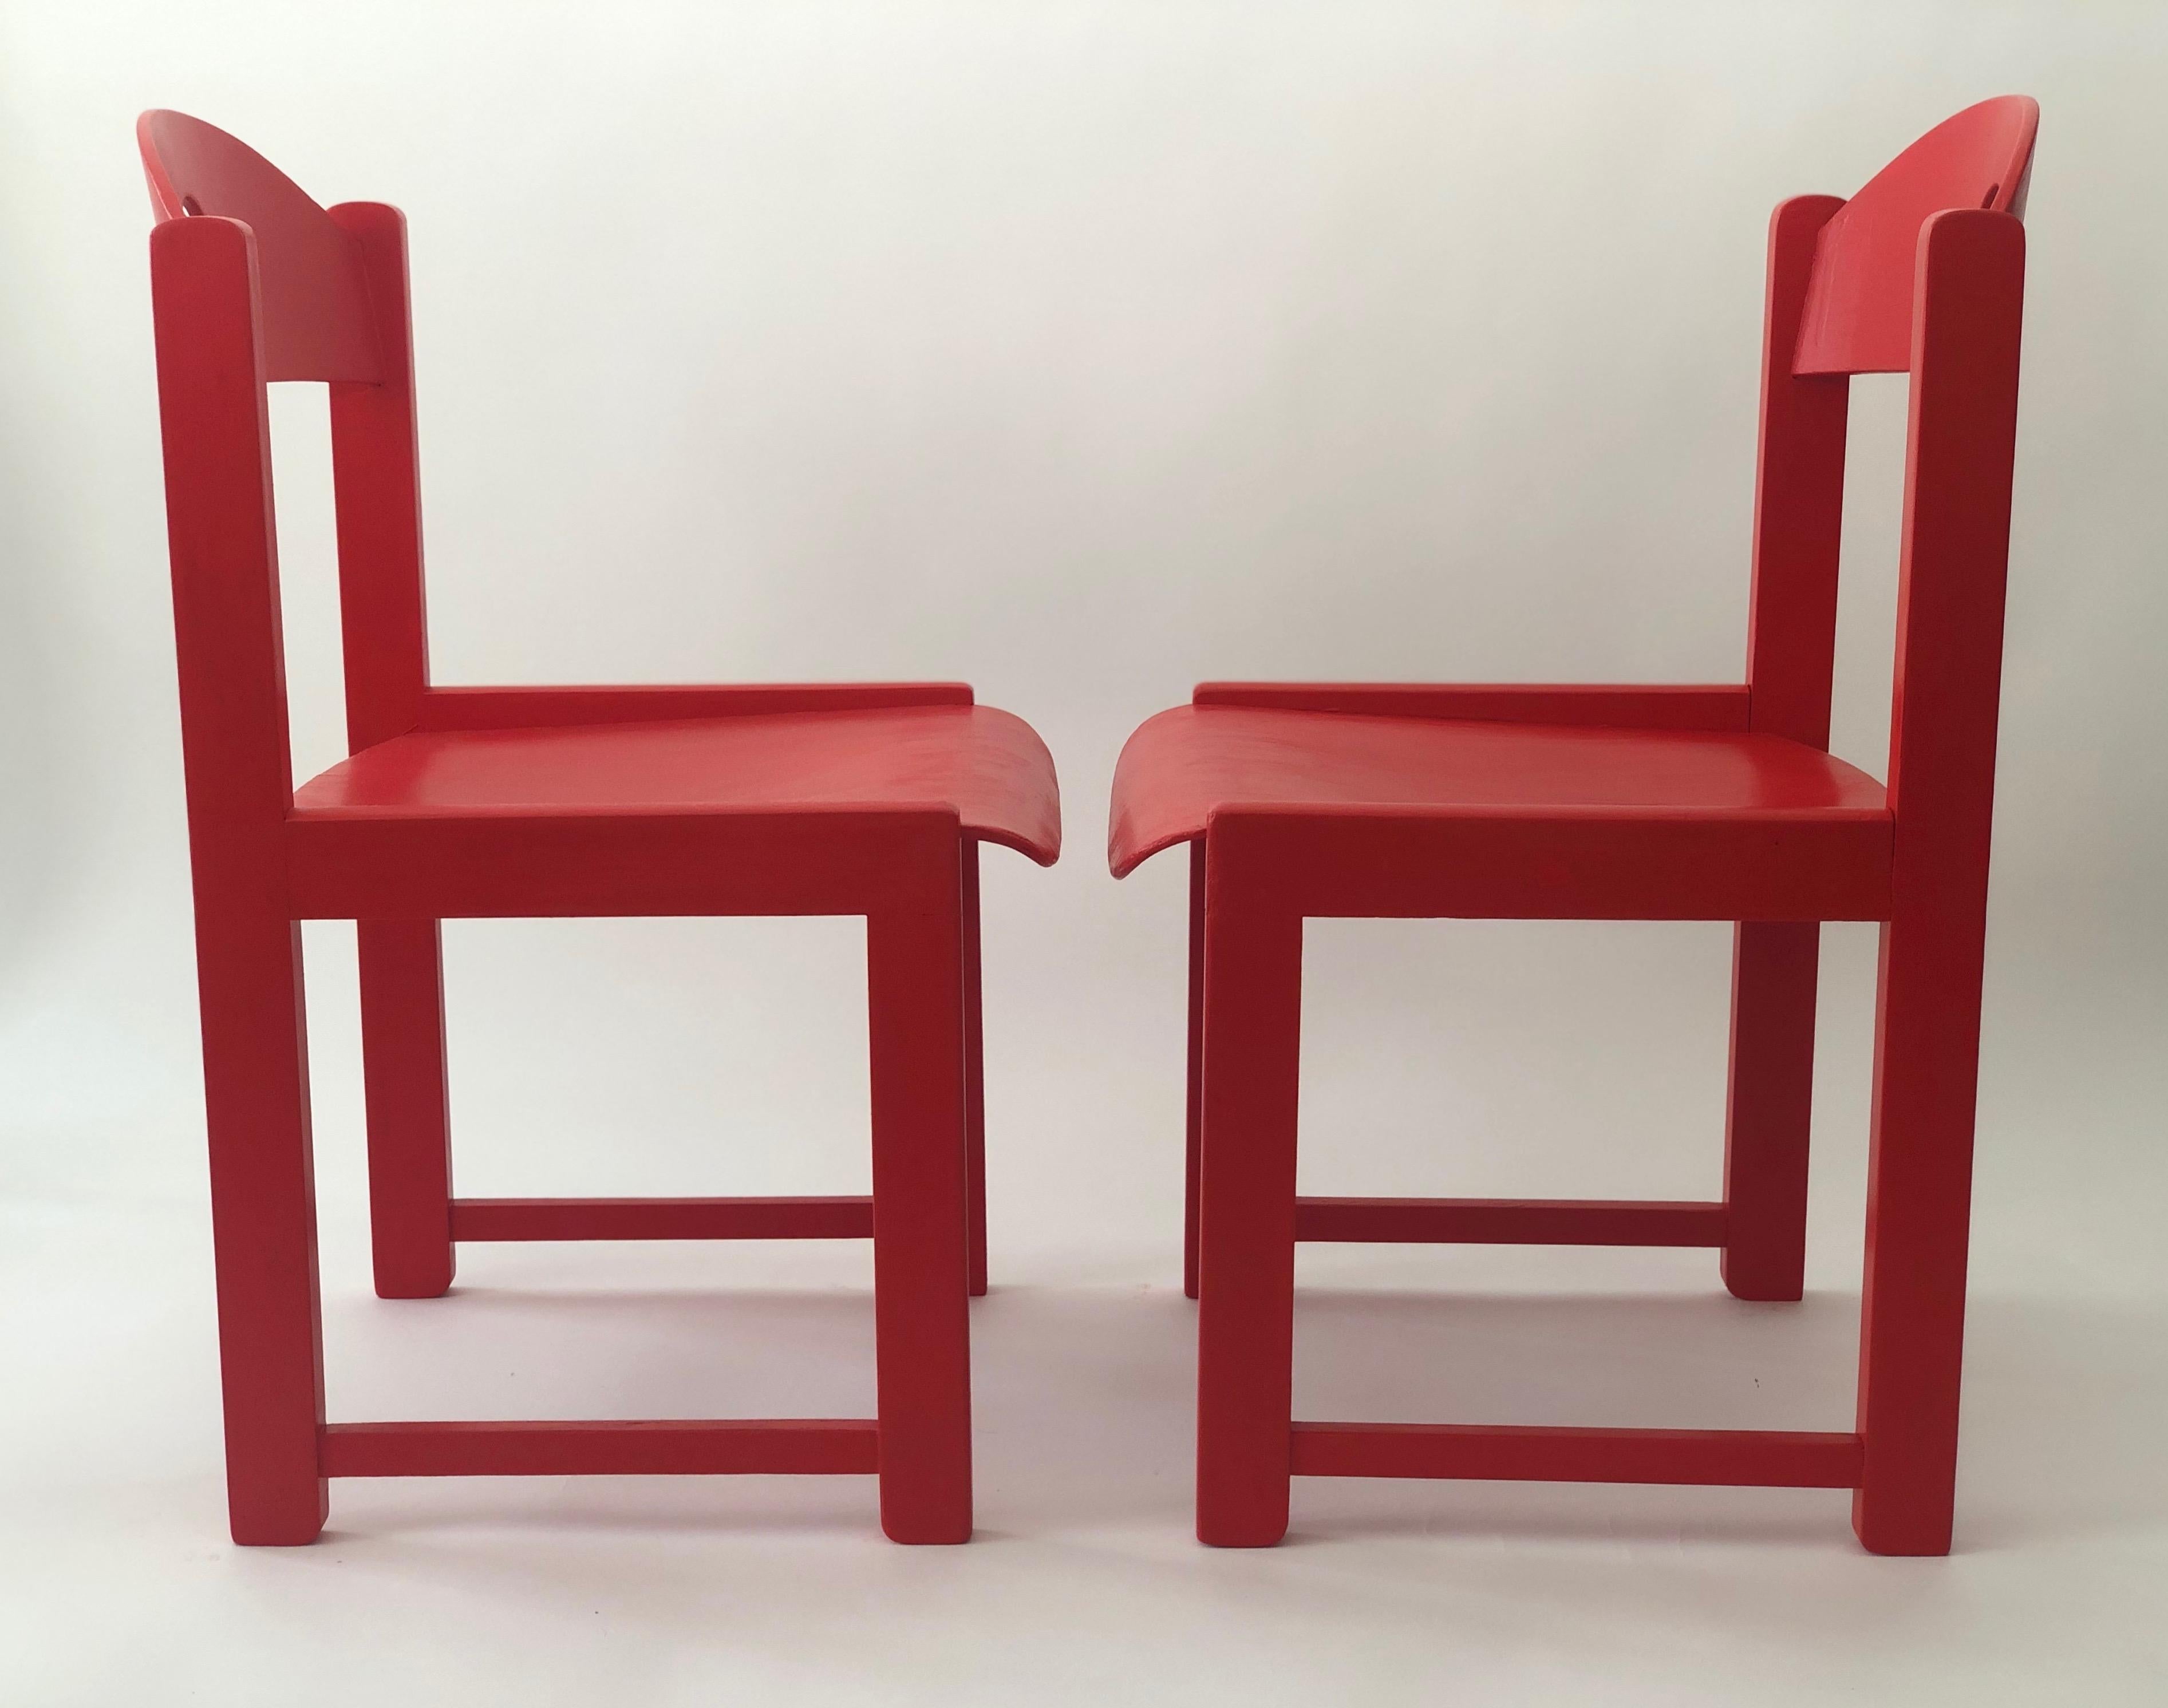 A pair of children chairs produced in the Czechoslovakia.
A beautiful 1970 's design, clear and functional.
The frame is made from hardwood, the seat and back from plywood.
The chairs have been restored and painted in the original color.